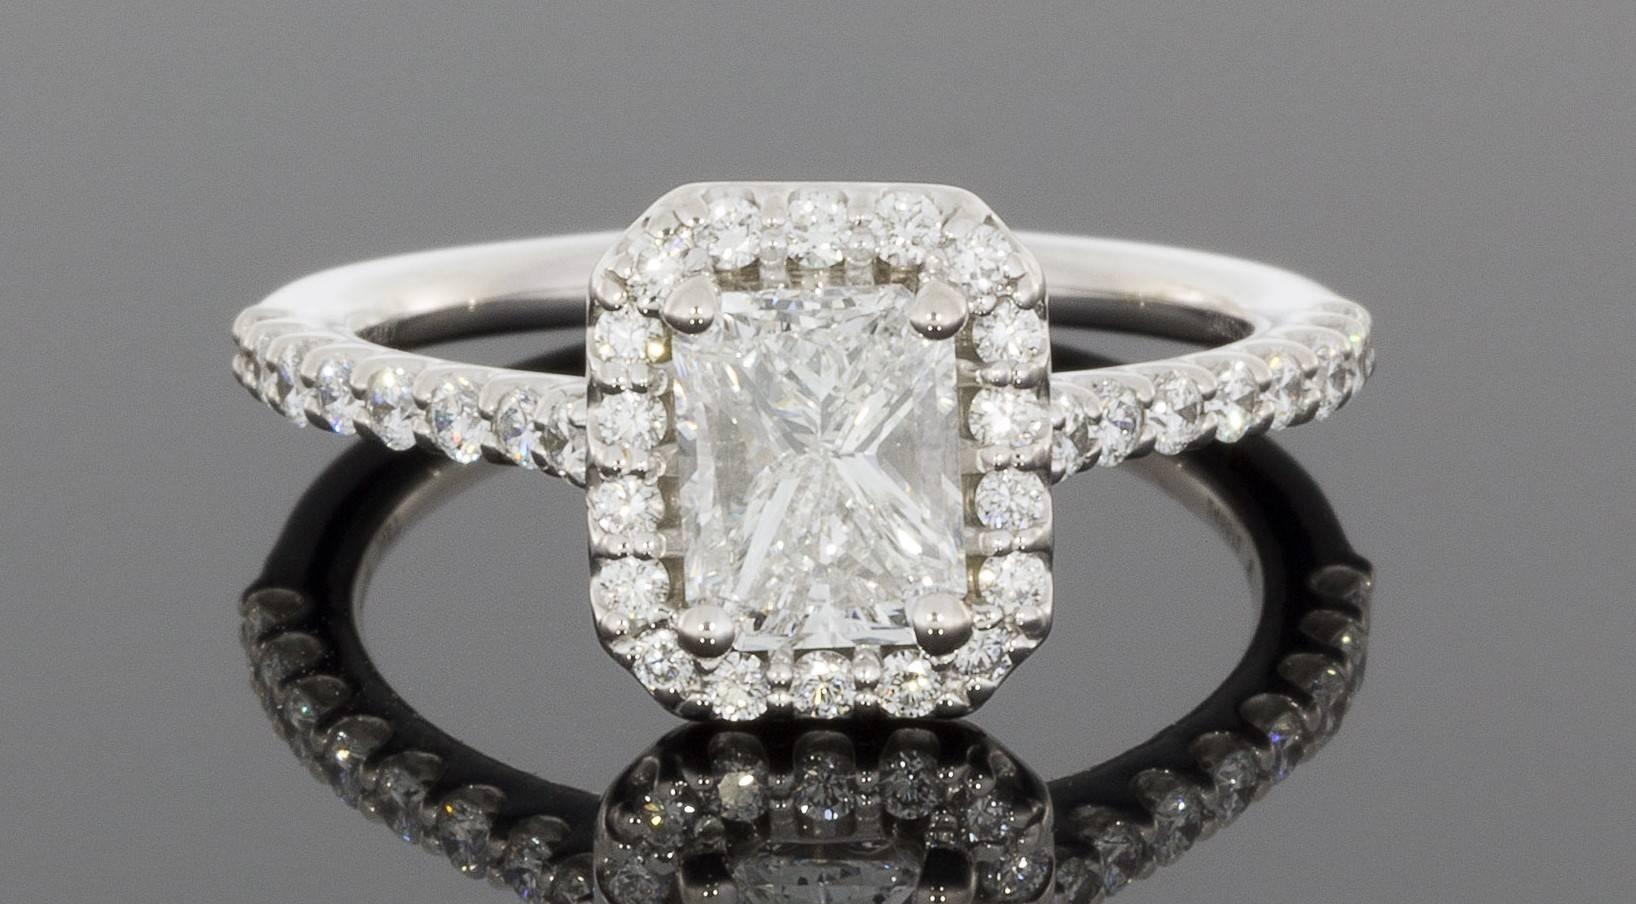 This beautiful halo diamond engagement ring is from the designer Ritani, one of the most recognized designers in the world. Ritani engagement rings feature the world's most beautiful diamonds and gemstones, hand selected by in-house, certified